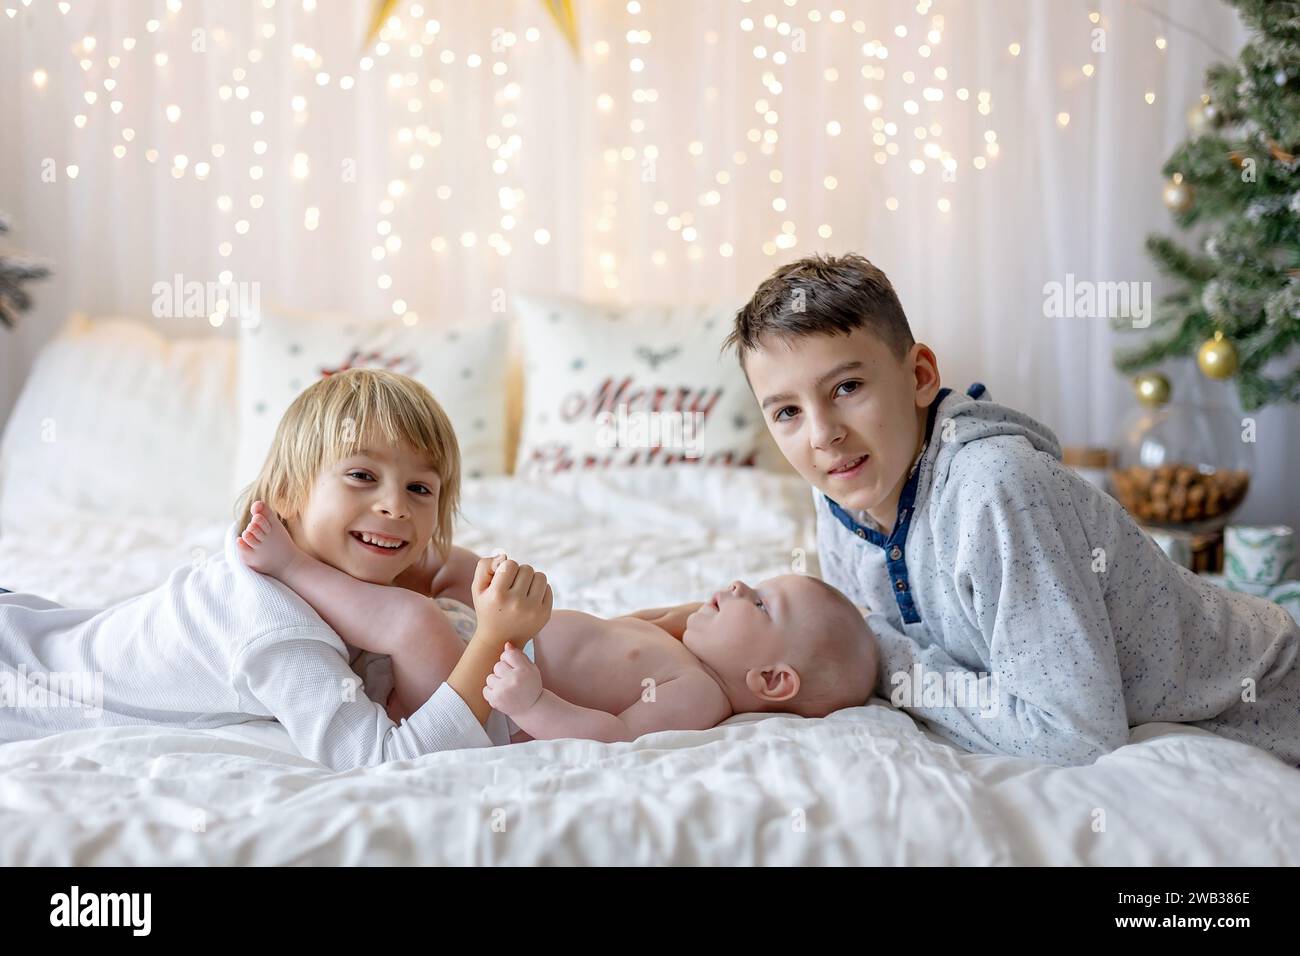 Happy family, newborn baby and older brothers, mom at home on Christmas Stock Photo